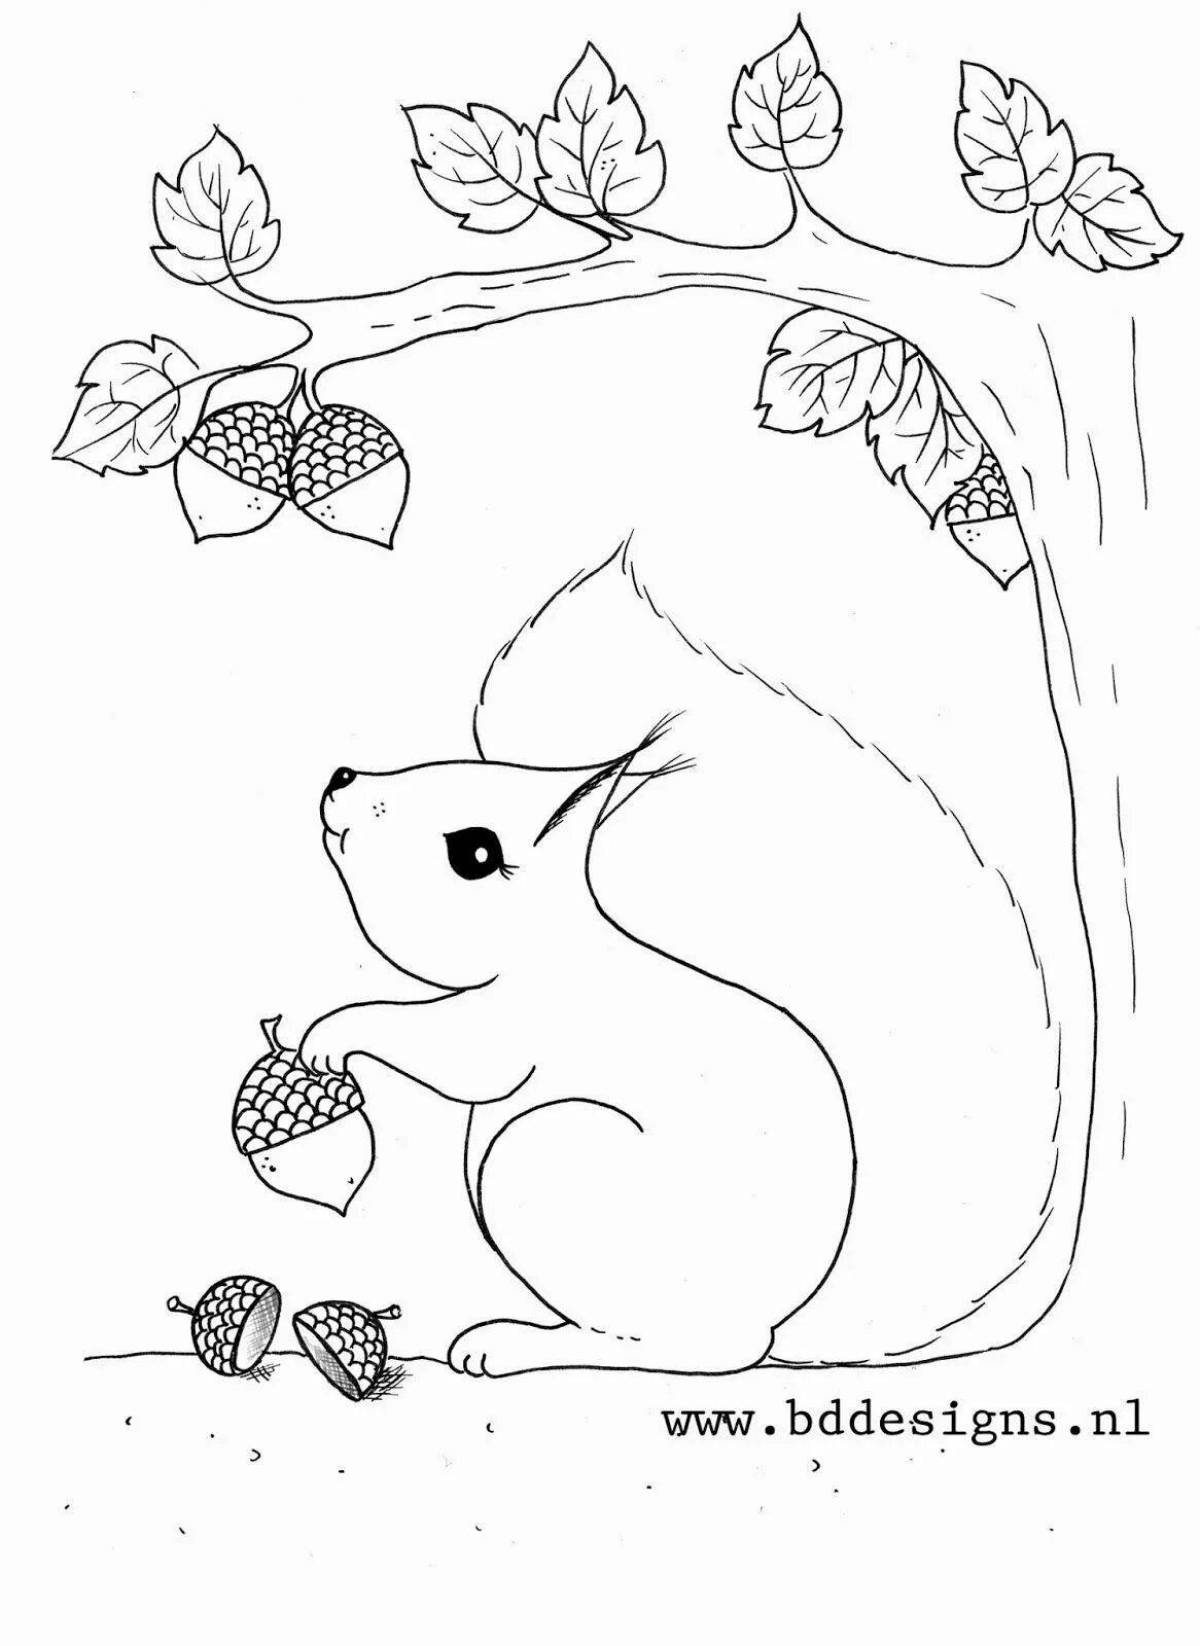 Animated squirrel coloring in the hollow